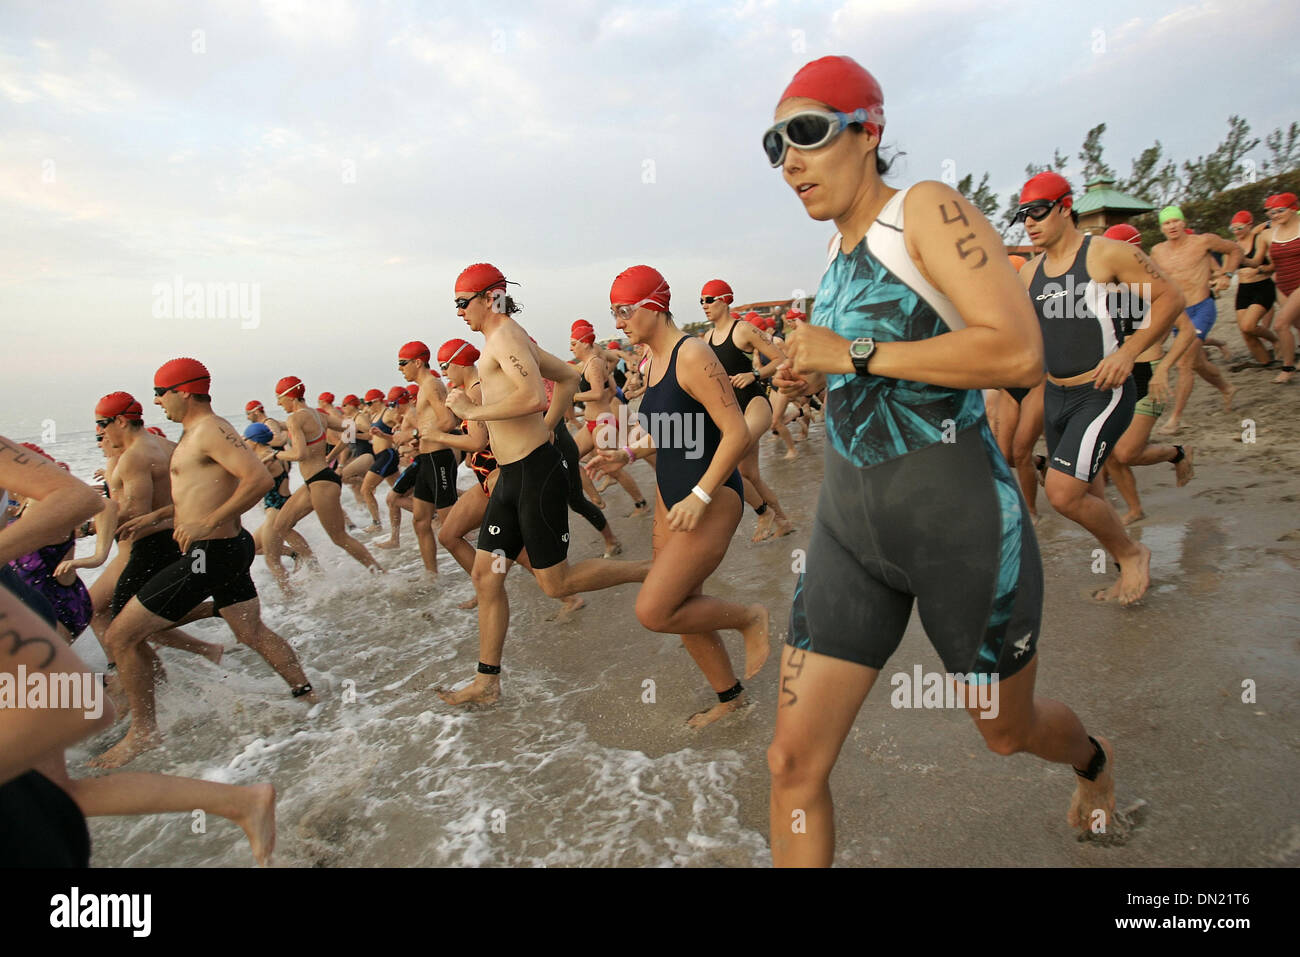 Apr 10, 2006; Boca Raton, FL, USA; Participants in the 2nd Wave enter the water during the 15th Annual Florida Atlantic University Wellness Triathlon in Spanish River Park Sunday morning. Mandatory Credit: Photo by Richard Graulich/Palm Beach Post/ZUMA Press. (©) Copyright 2006 by Palm Beach Post Stock Photo